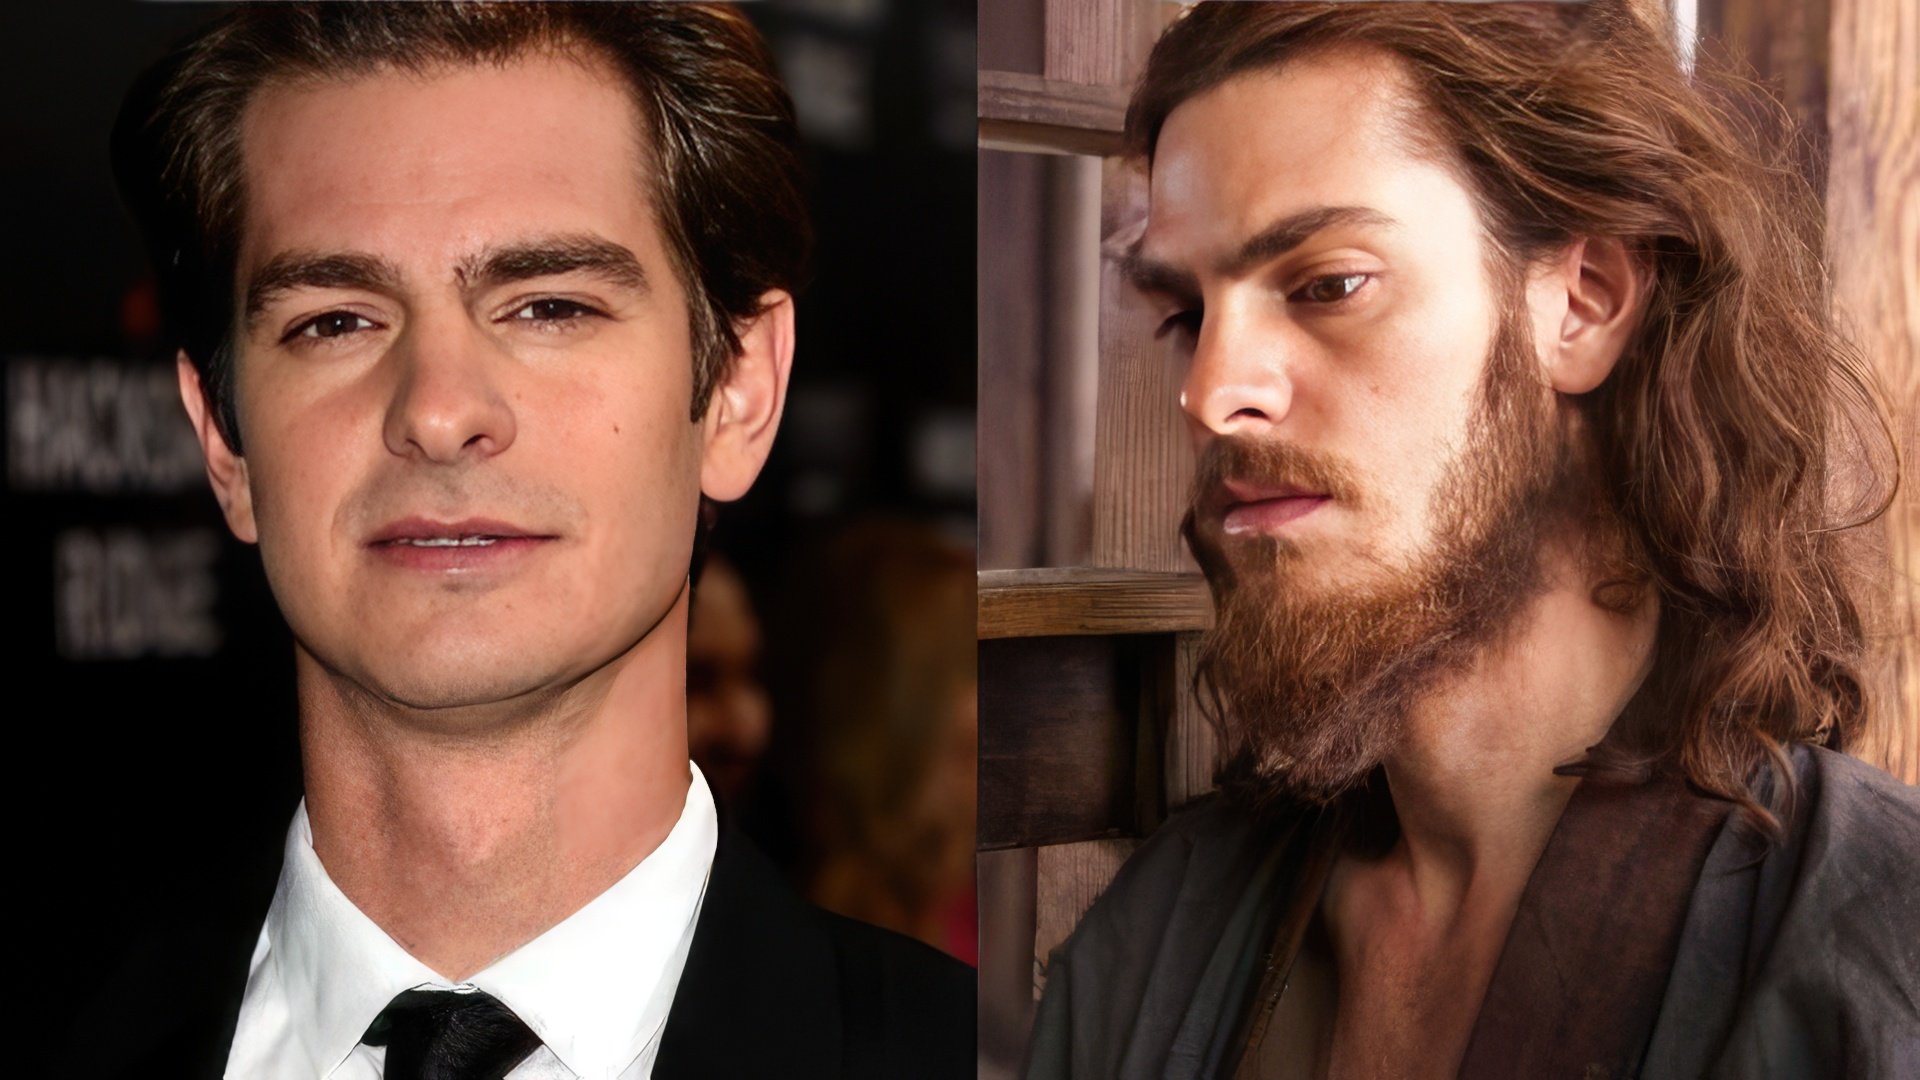 For Silence, Andrew Garfield lost 40 pounds